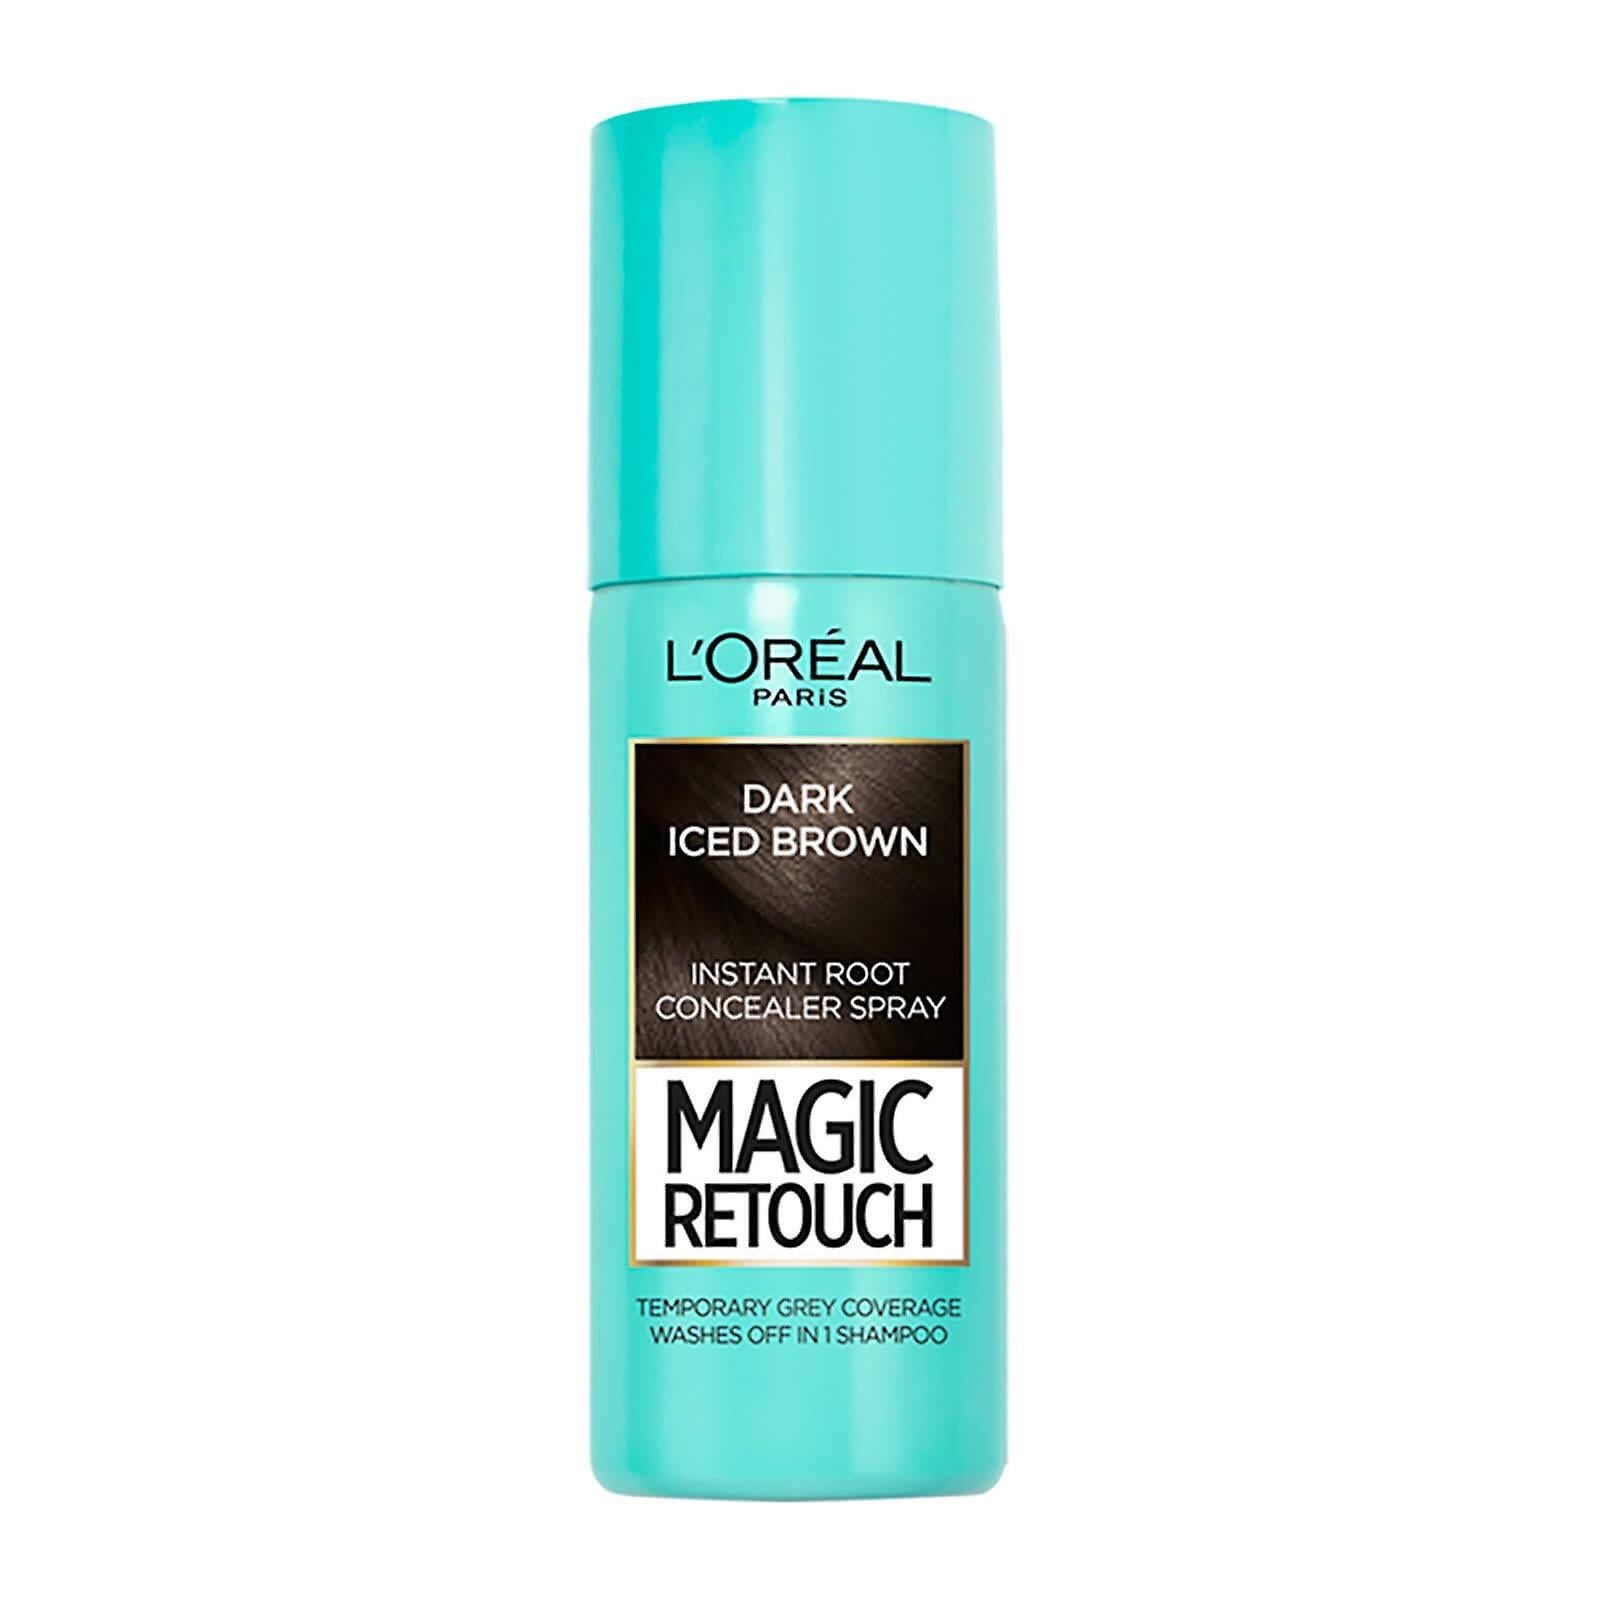 L'Oreal Paris Magic Retouch Instant Root Touch Up - Dark Iced Brown, 75ml